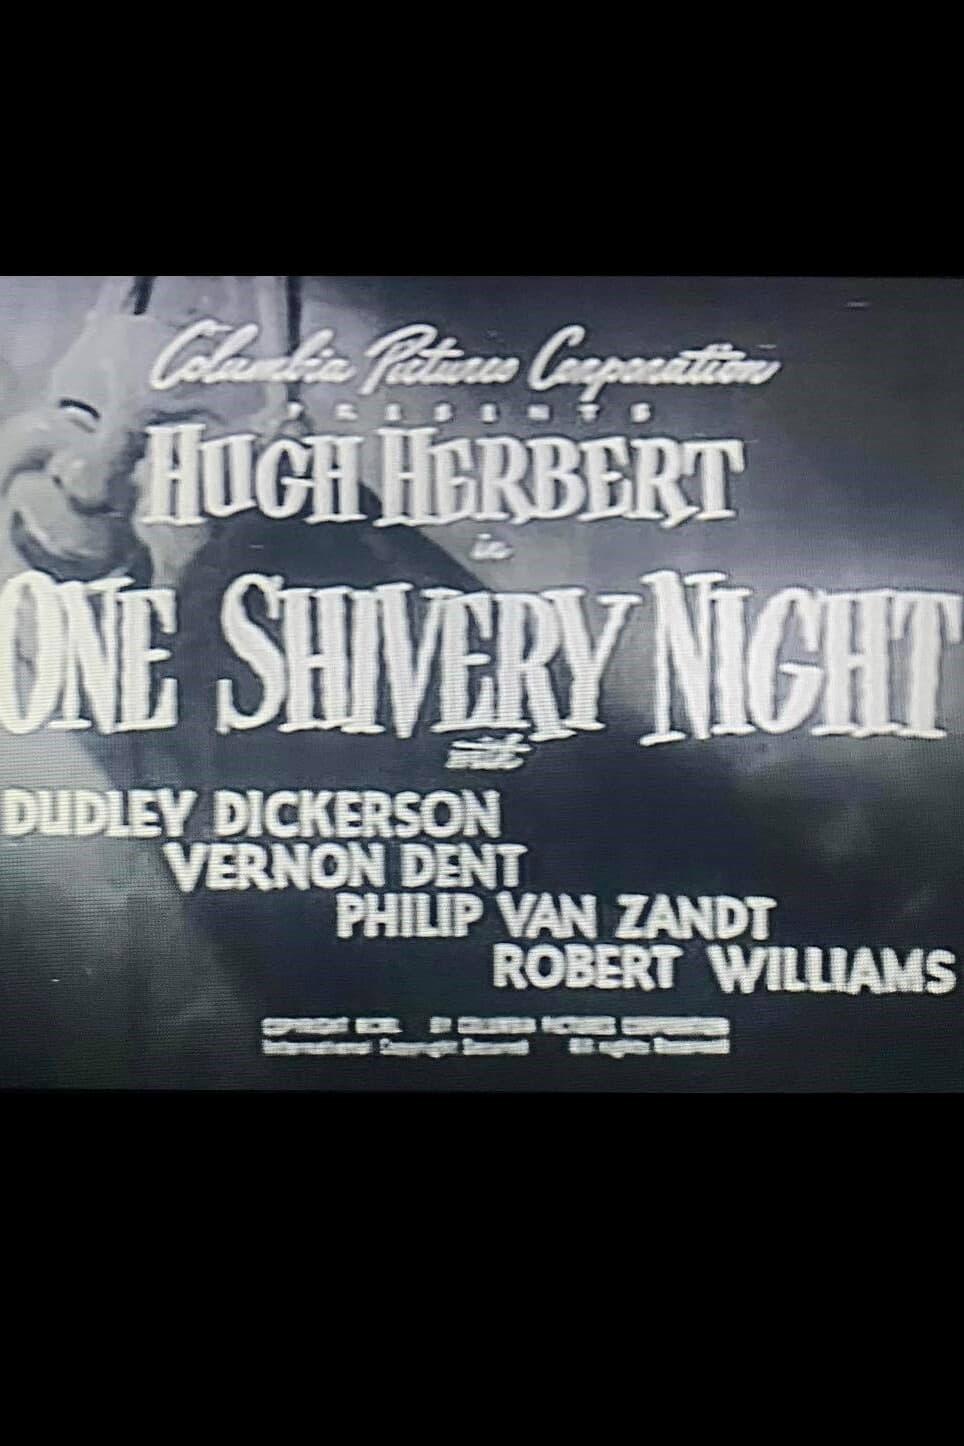 One Shivery Night poster